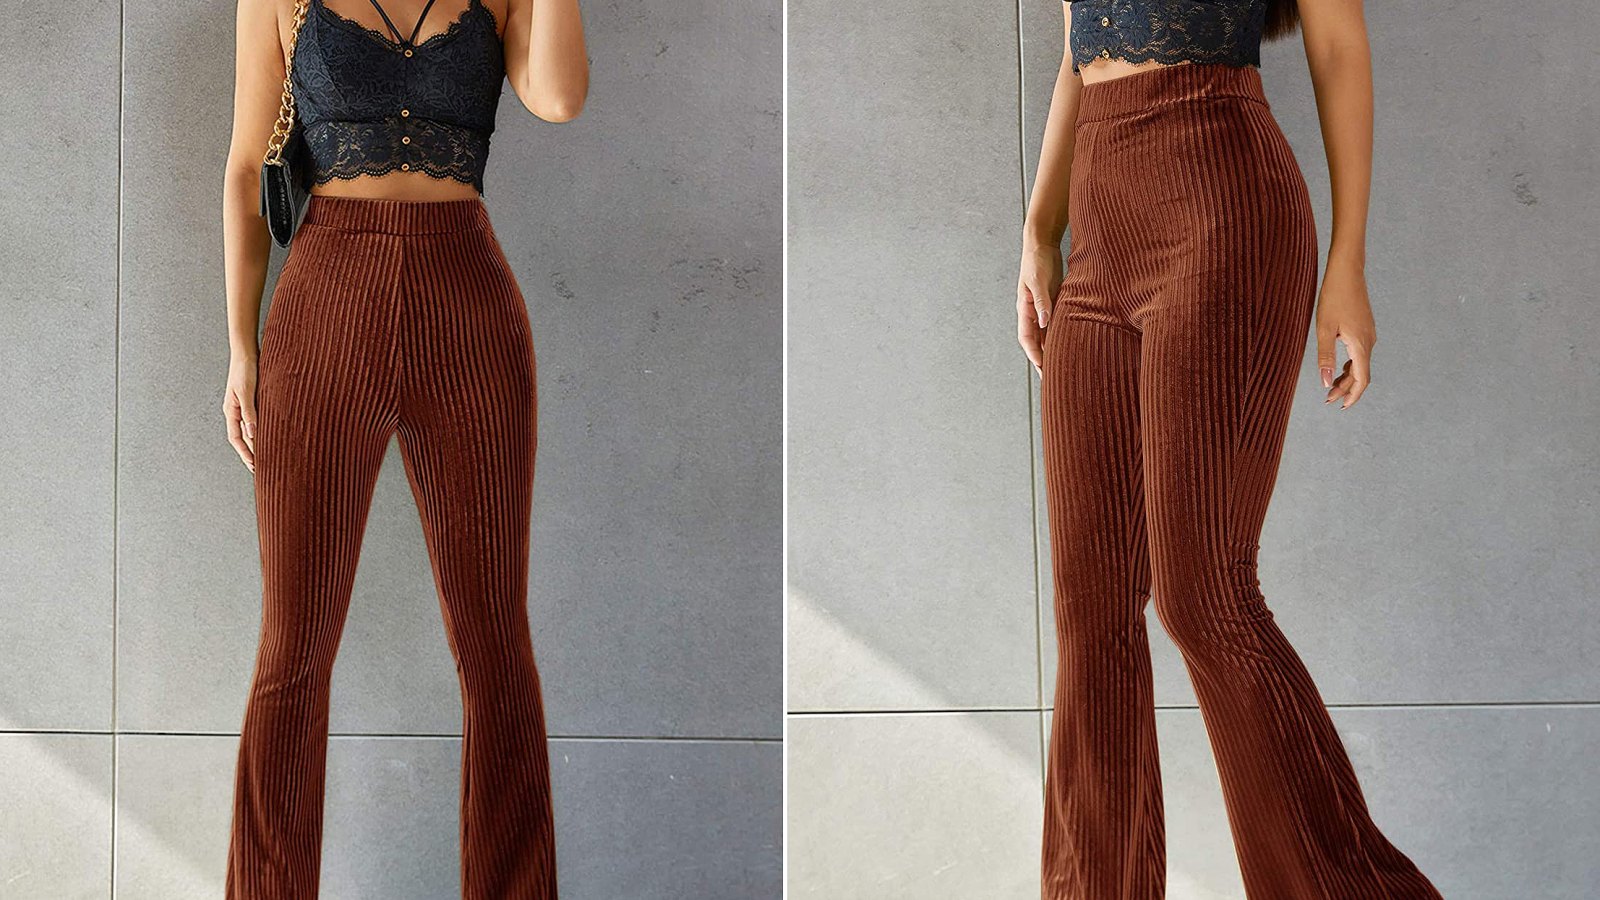 Floerns Velvet Flare Pants Are the Cutest Things Ever